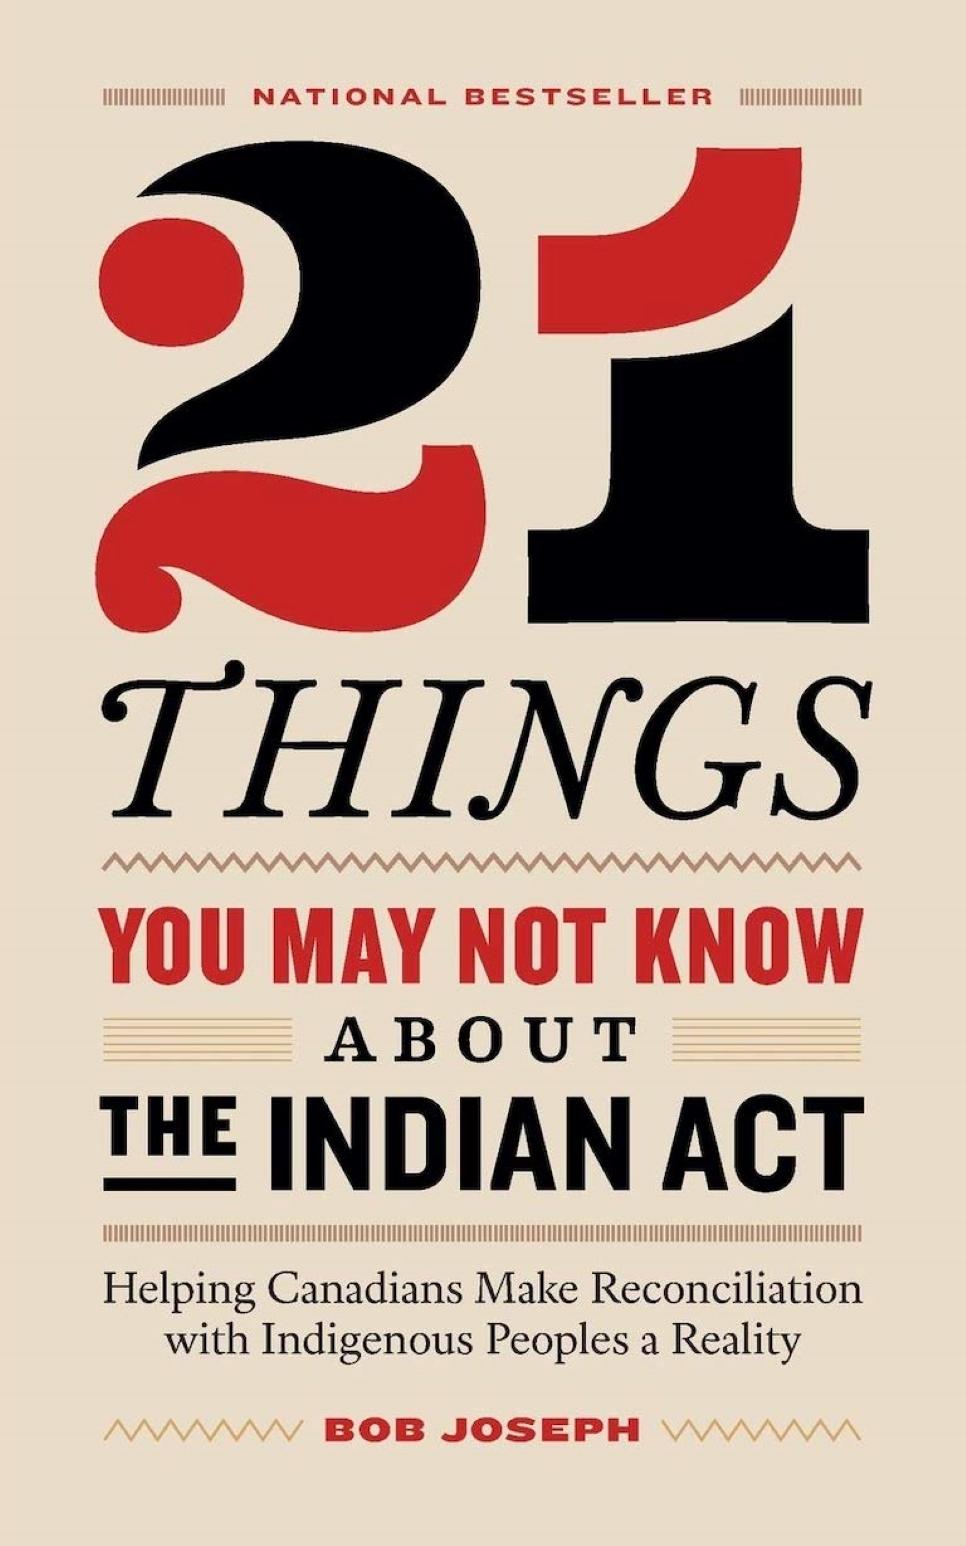 21 things you may not know about the Indian Act book cover, Bob Joseph (ii’ taa’poh’to’p Indigenous UCalgary)